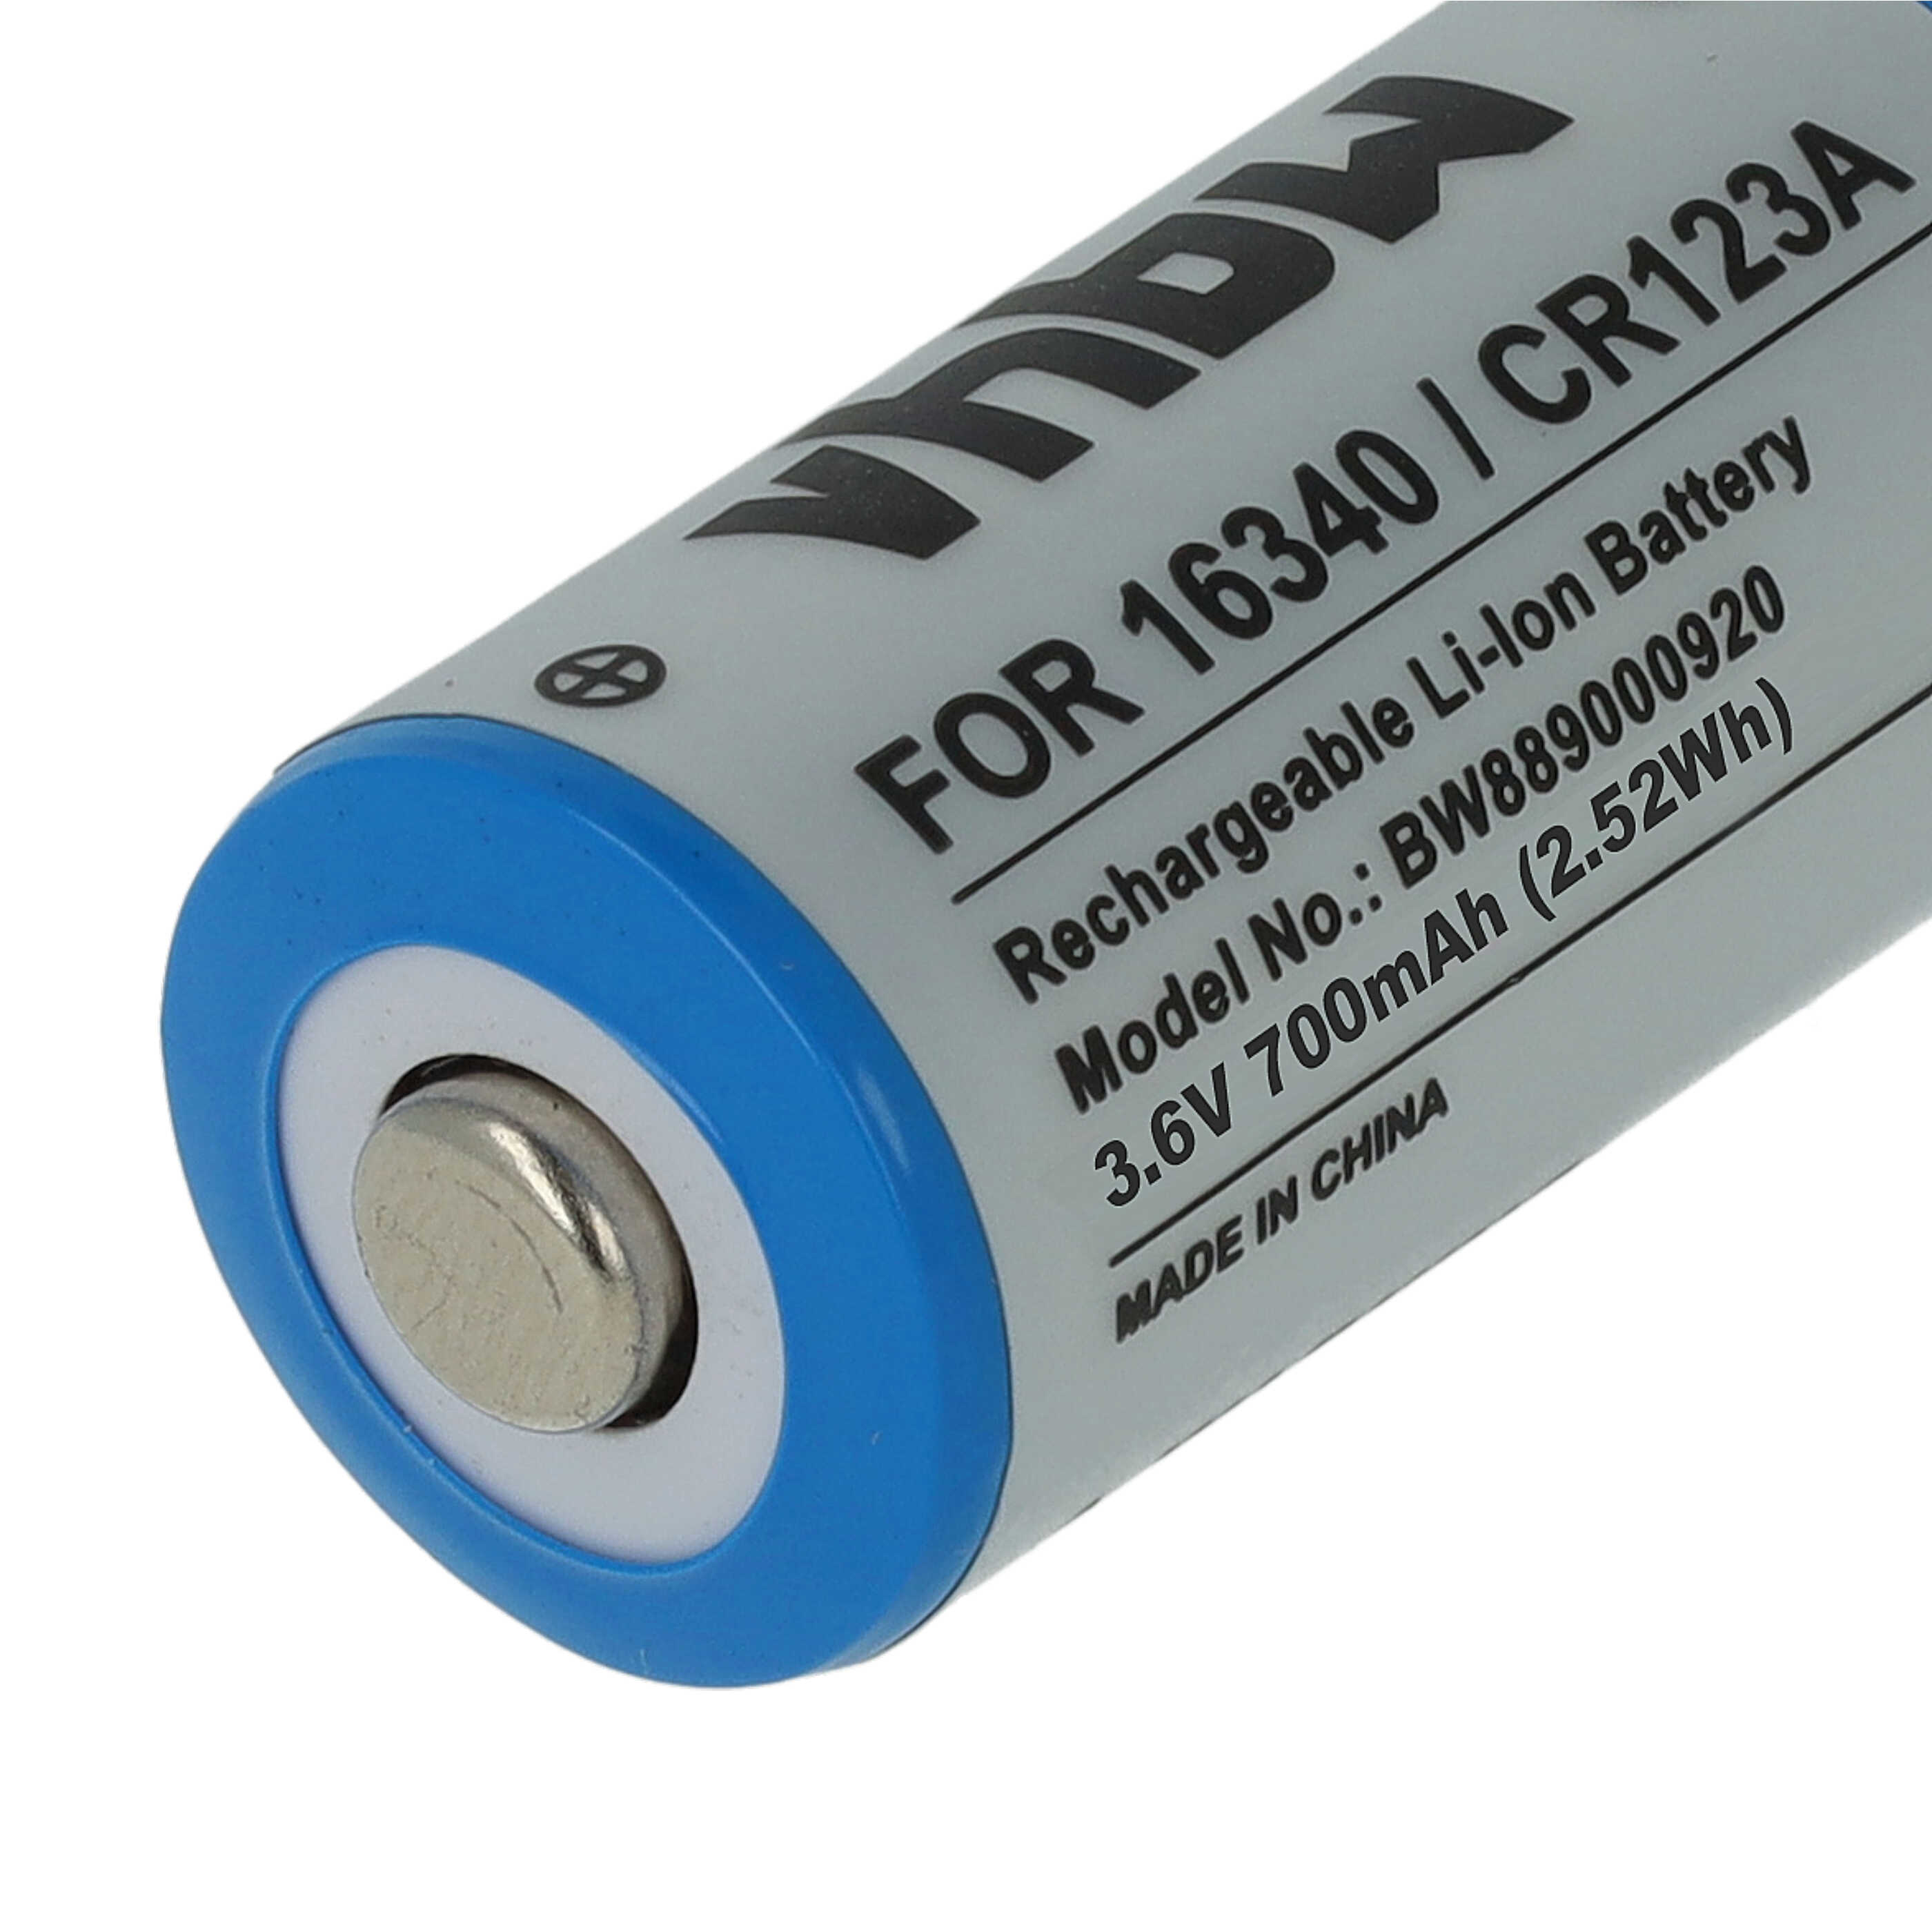 Battery (5 Units) Replacement for 16340, DL123A, CR123R, CR17335, CR17345, CR123A - 700mAh 3.6V Li-Ion